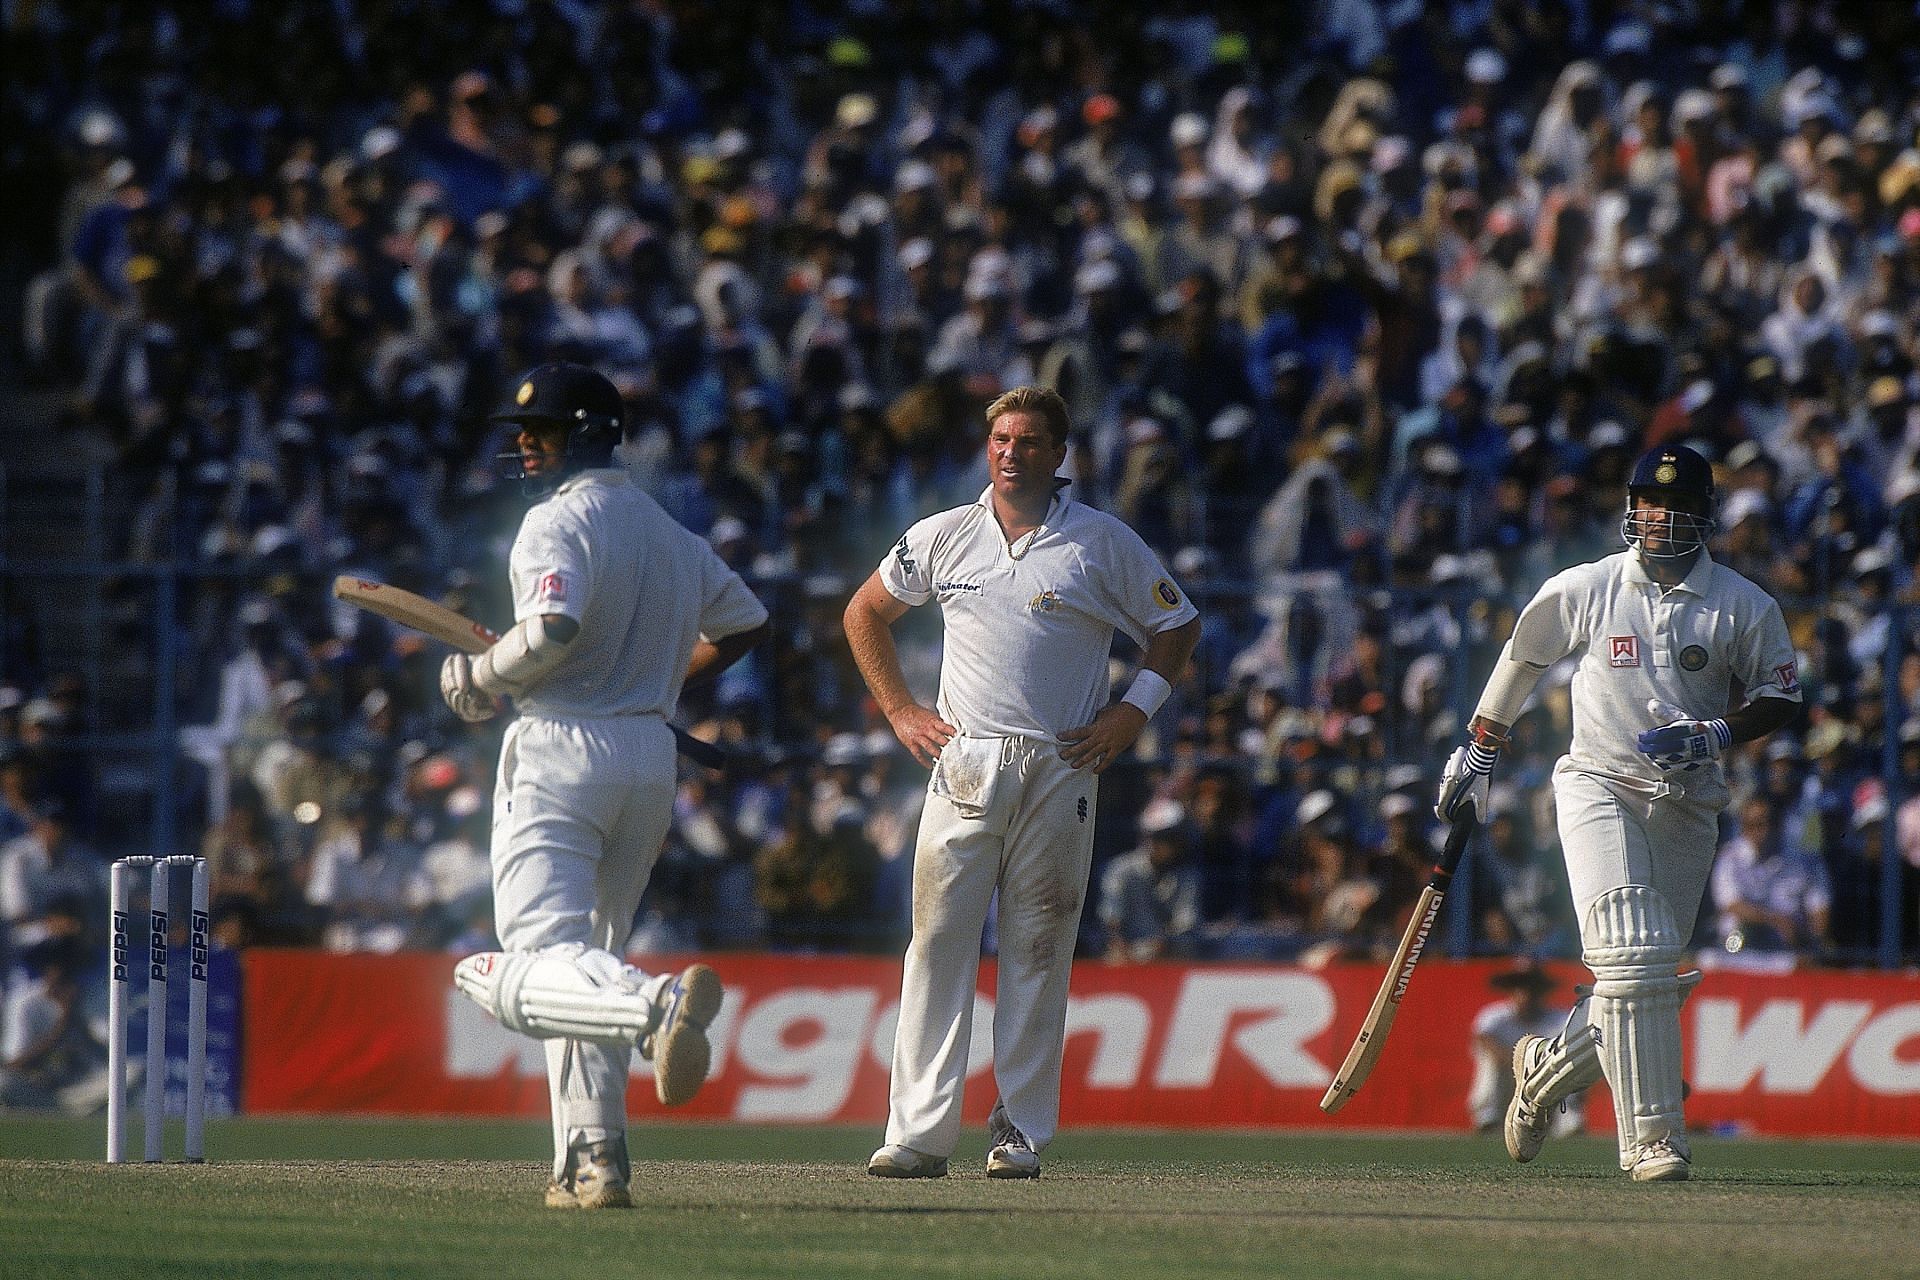 The Aussie spin wizard looks frustrated during the historic 2001 Test in Kolkata. Pic: Getty Images